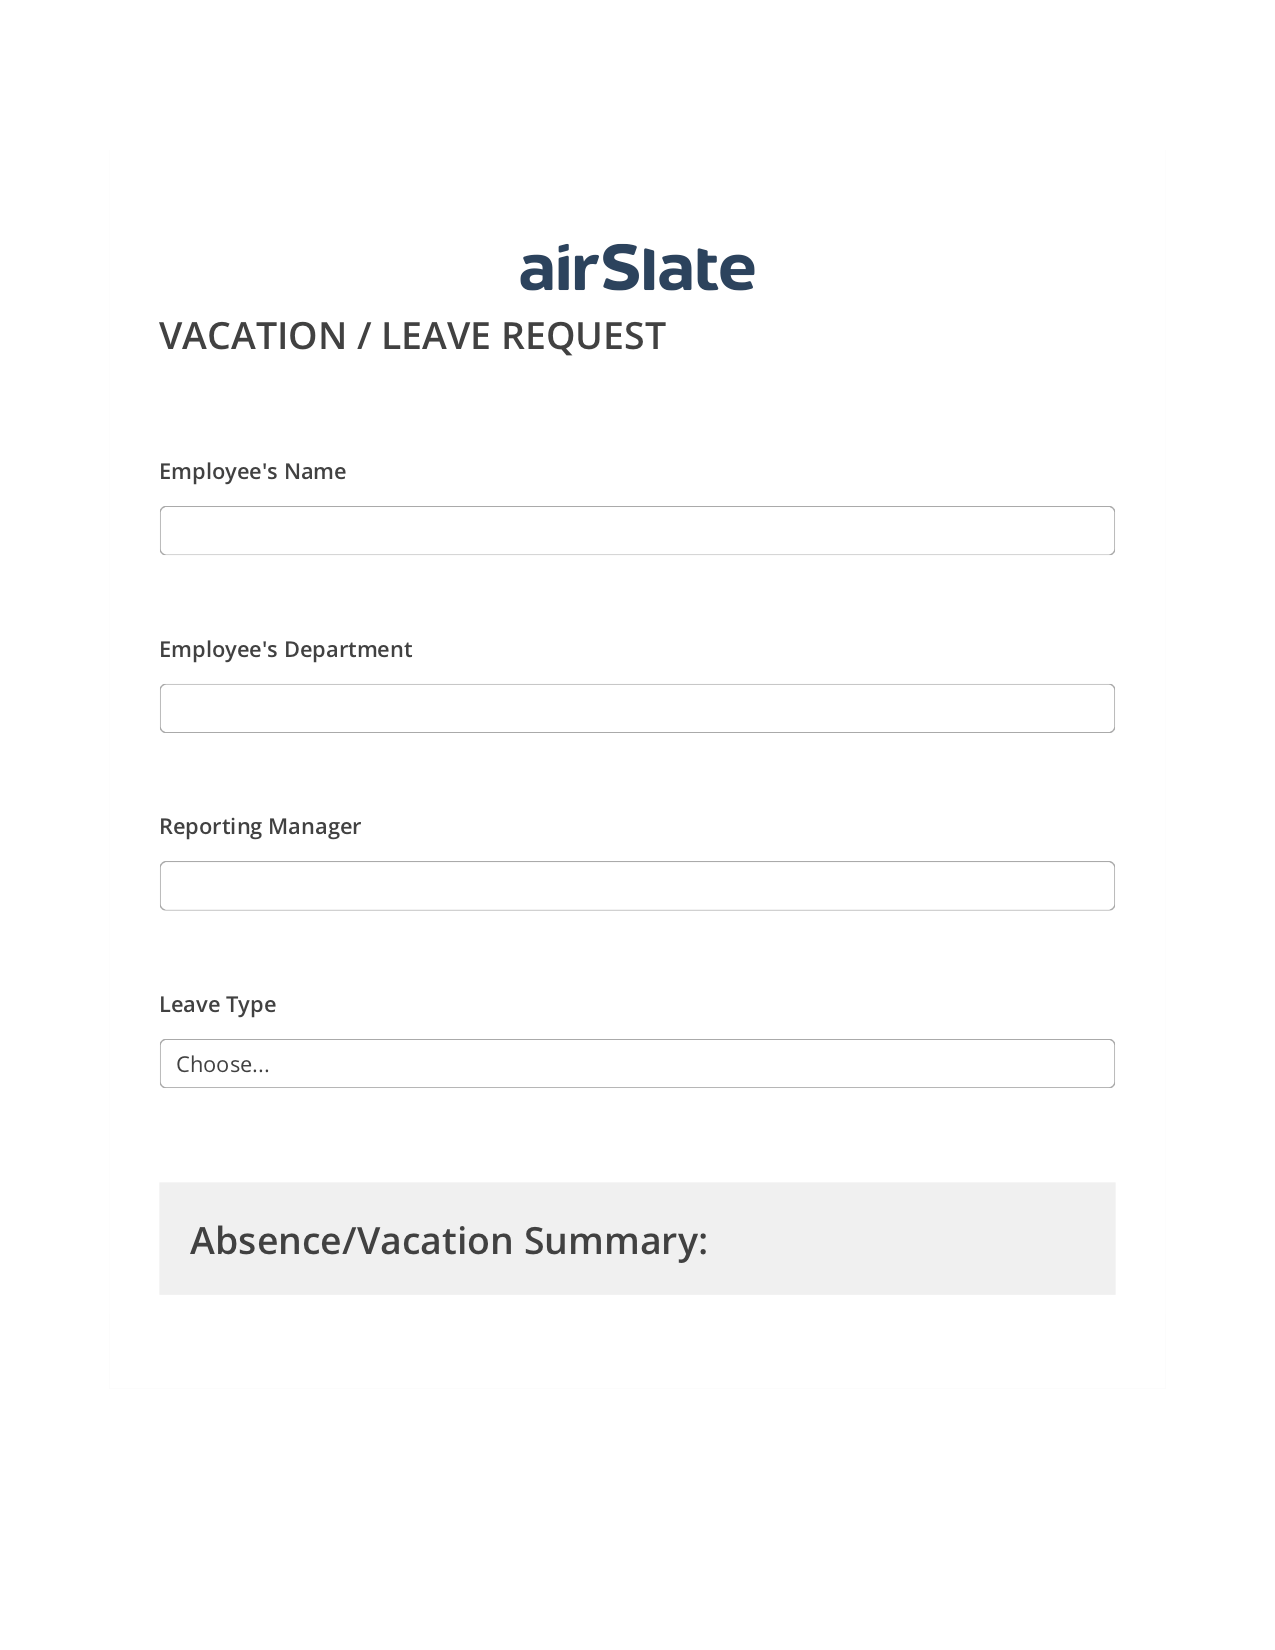 Multirole Vacation/Leave Request Workflow Pre-fill Dropdowns from Airtable, Remove Slate Bot, Export to Excel 365 Bot